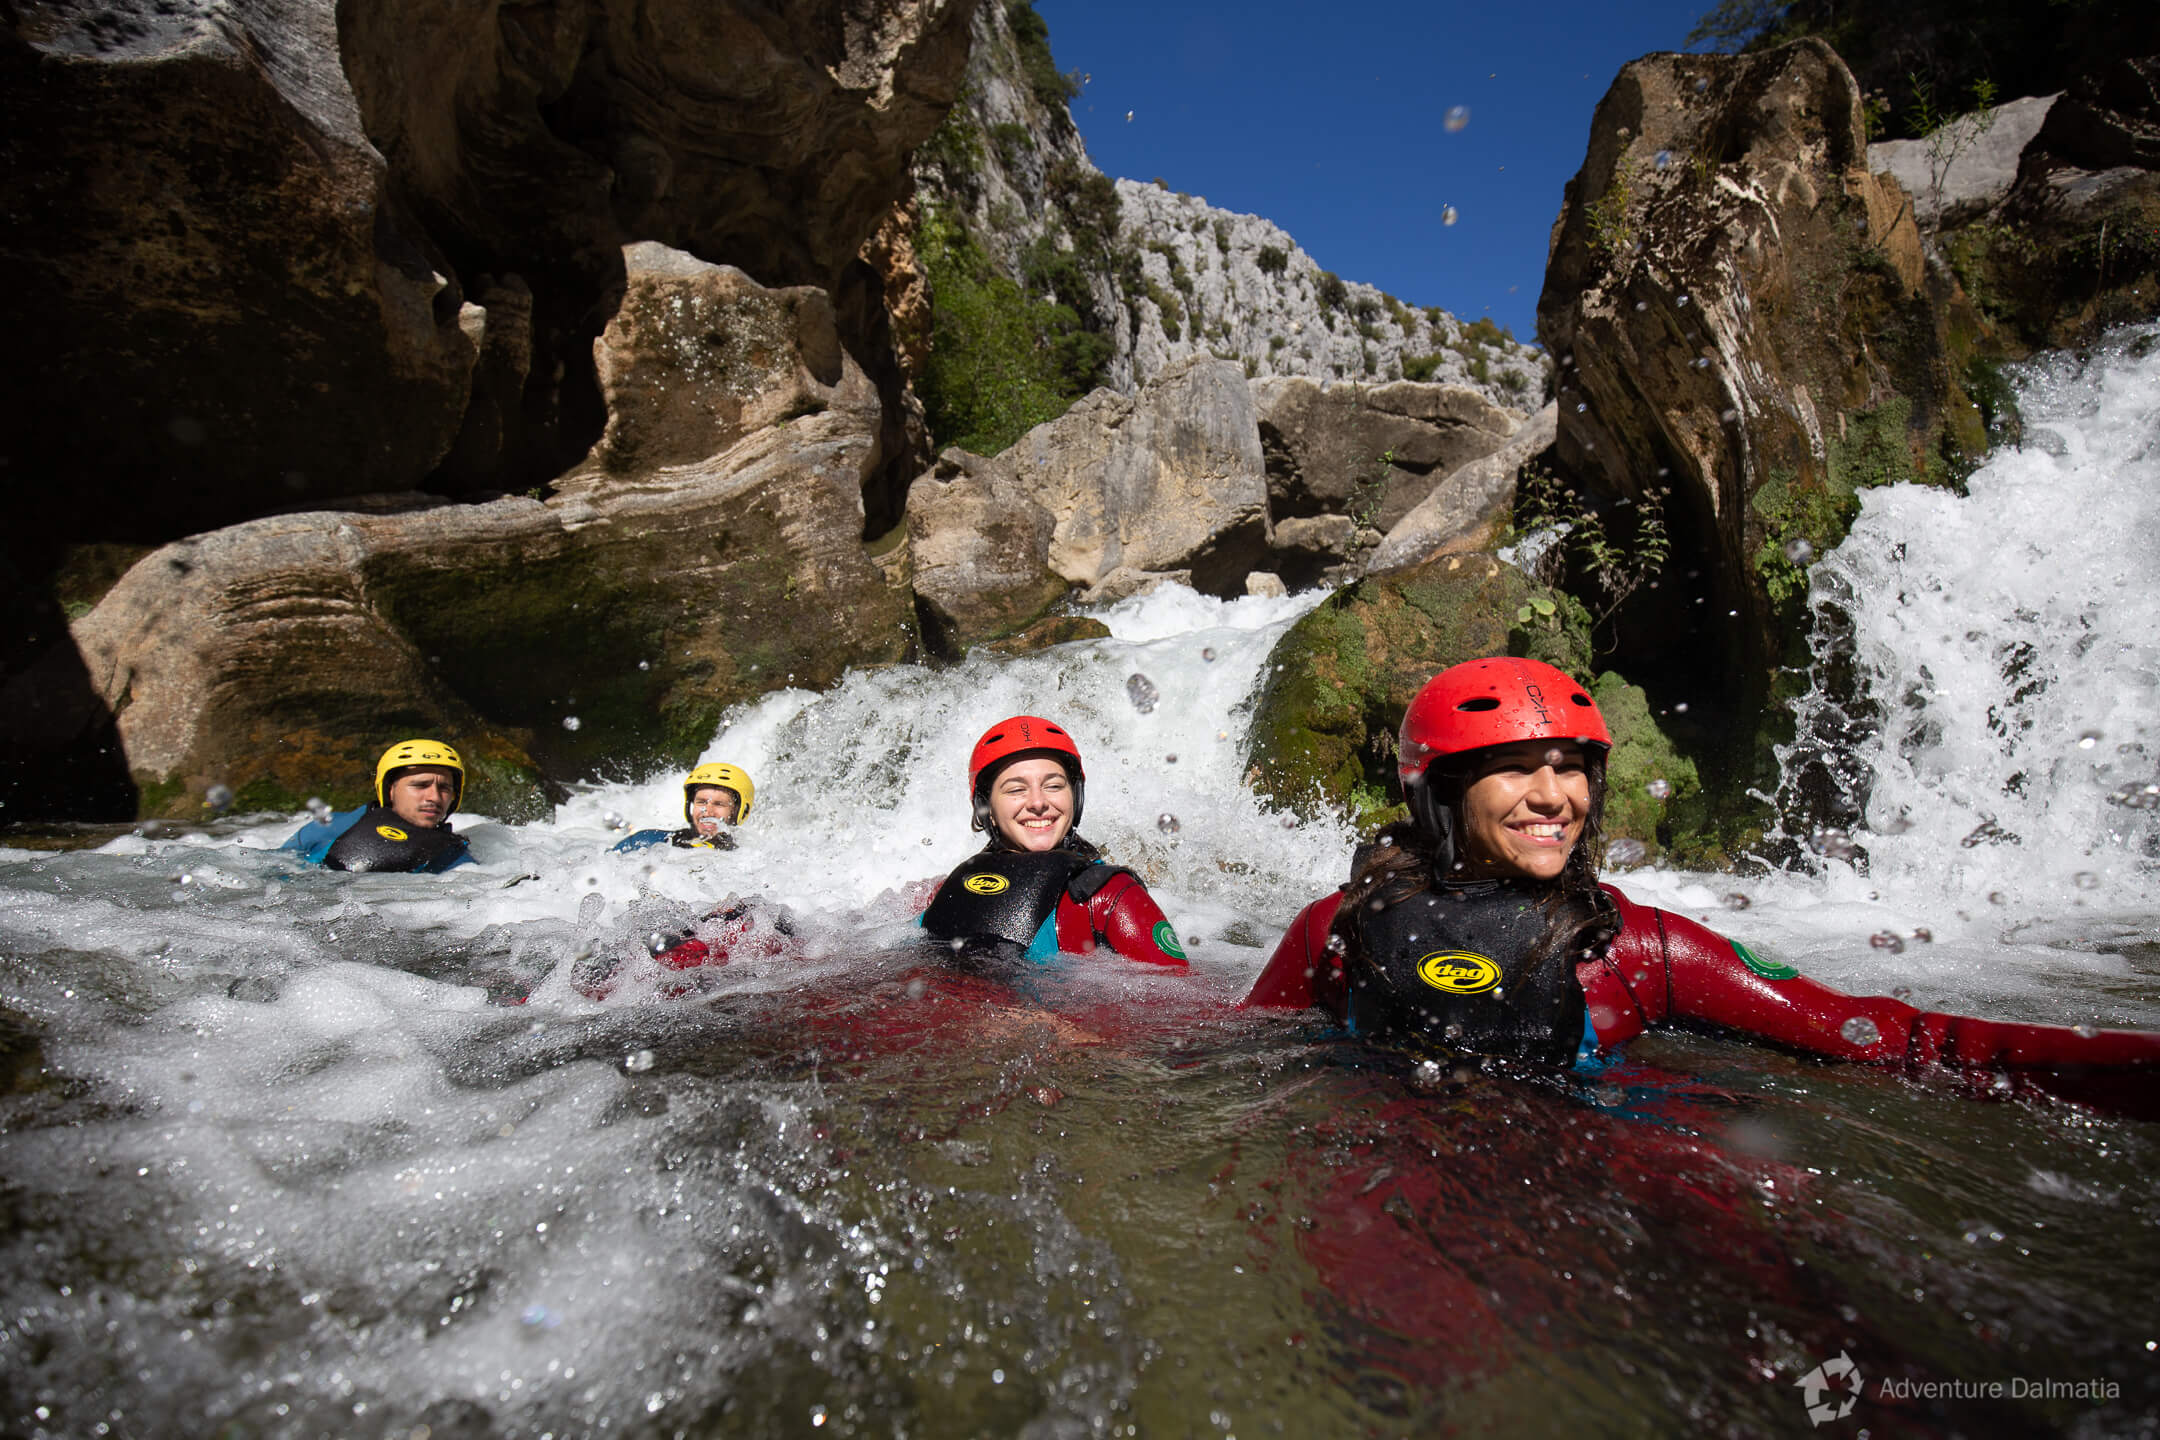 Crystal clear waters of Cetina river on basic canyoning tour, 45min driving distance from Split